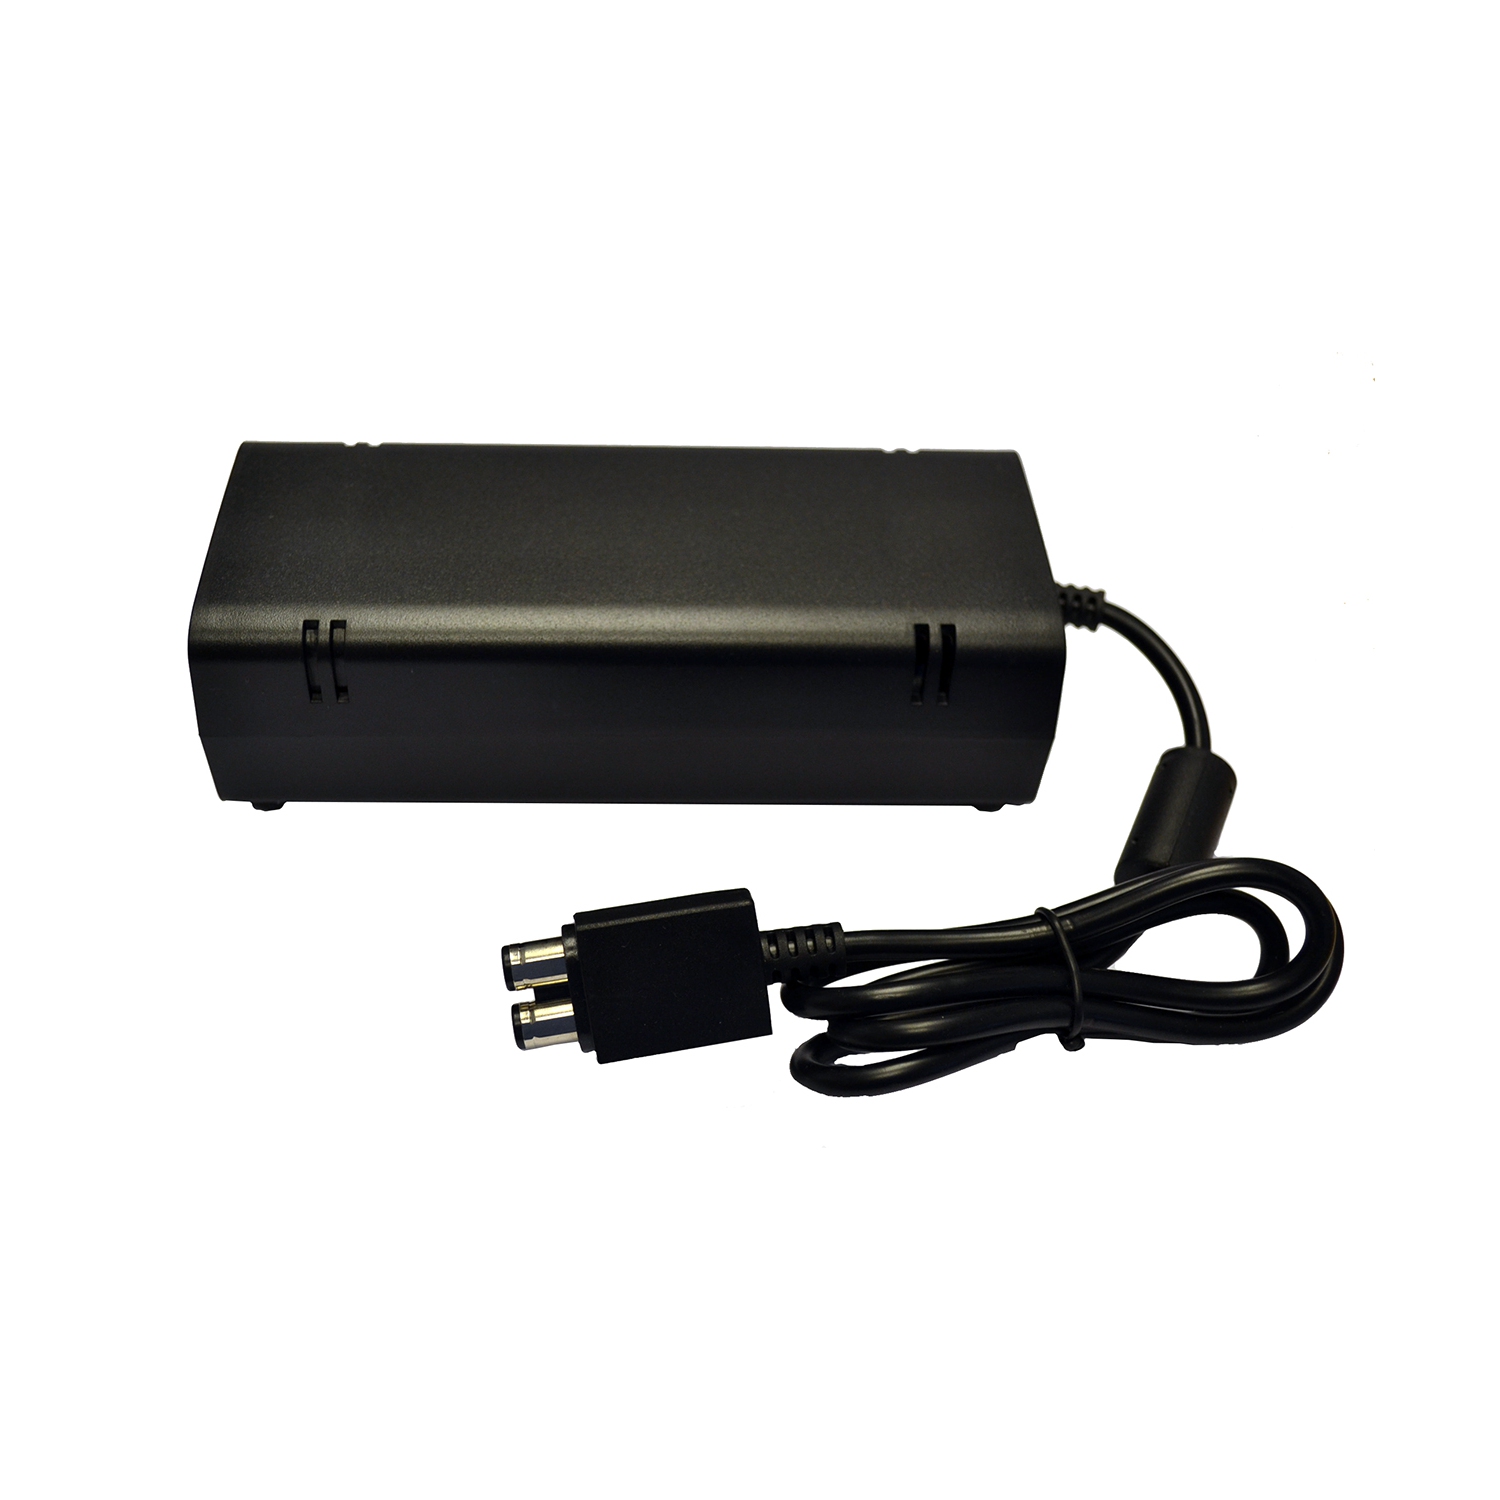 Replacement AC Power Adapter for XBox 360 Slim by Mars Devices